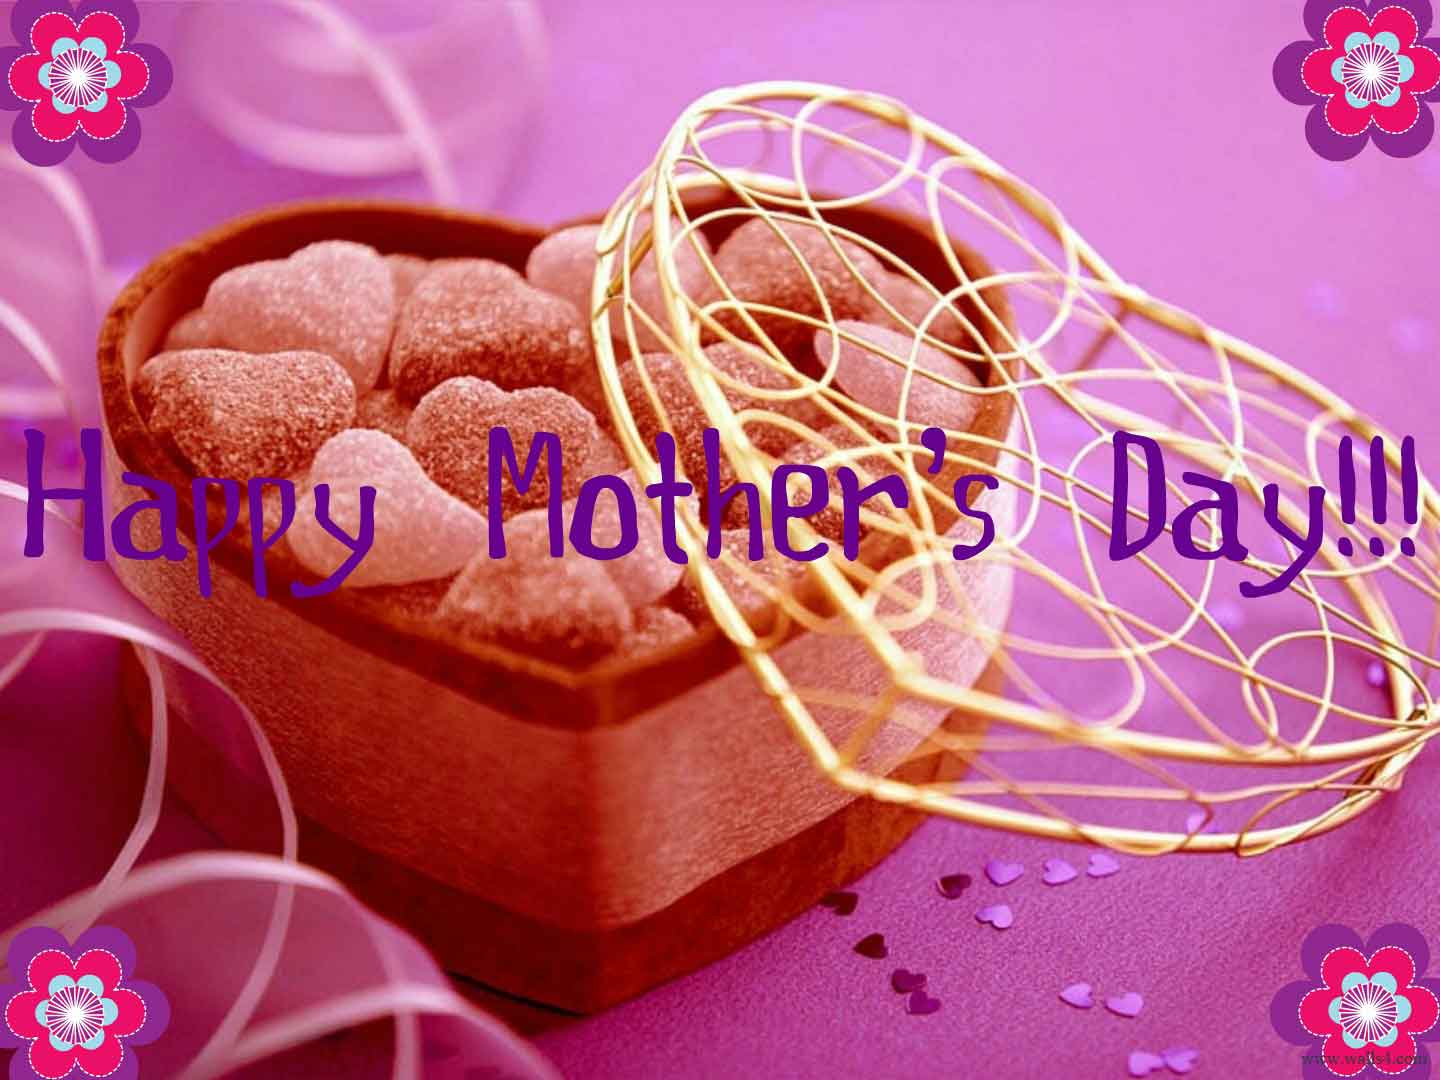 Happy Mothers Day Wallpaper Christian